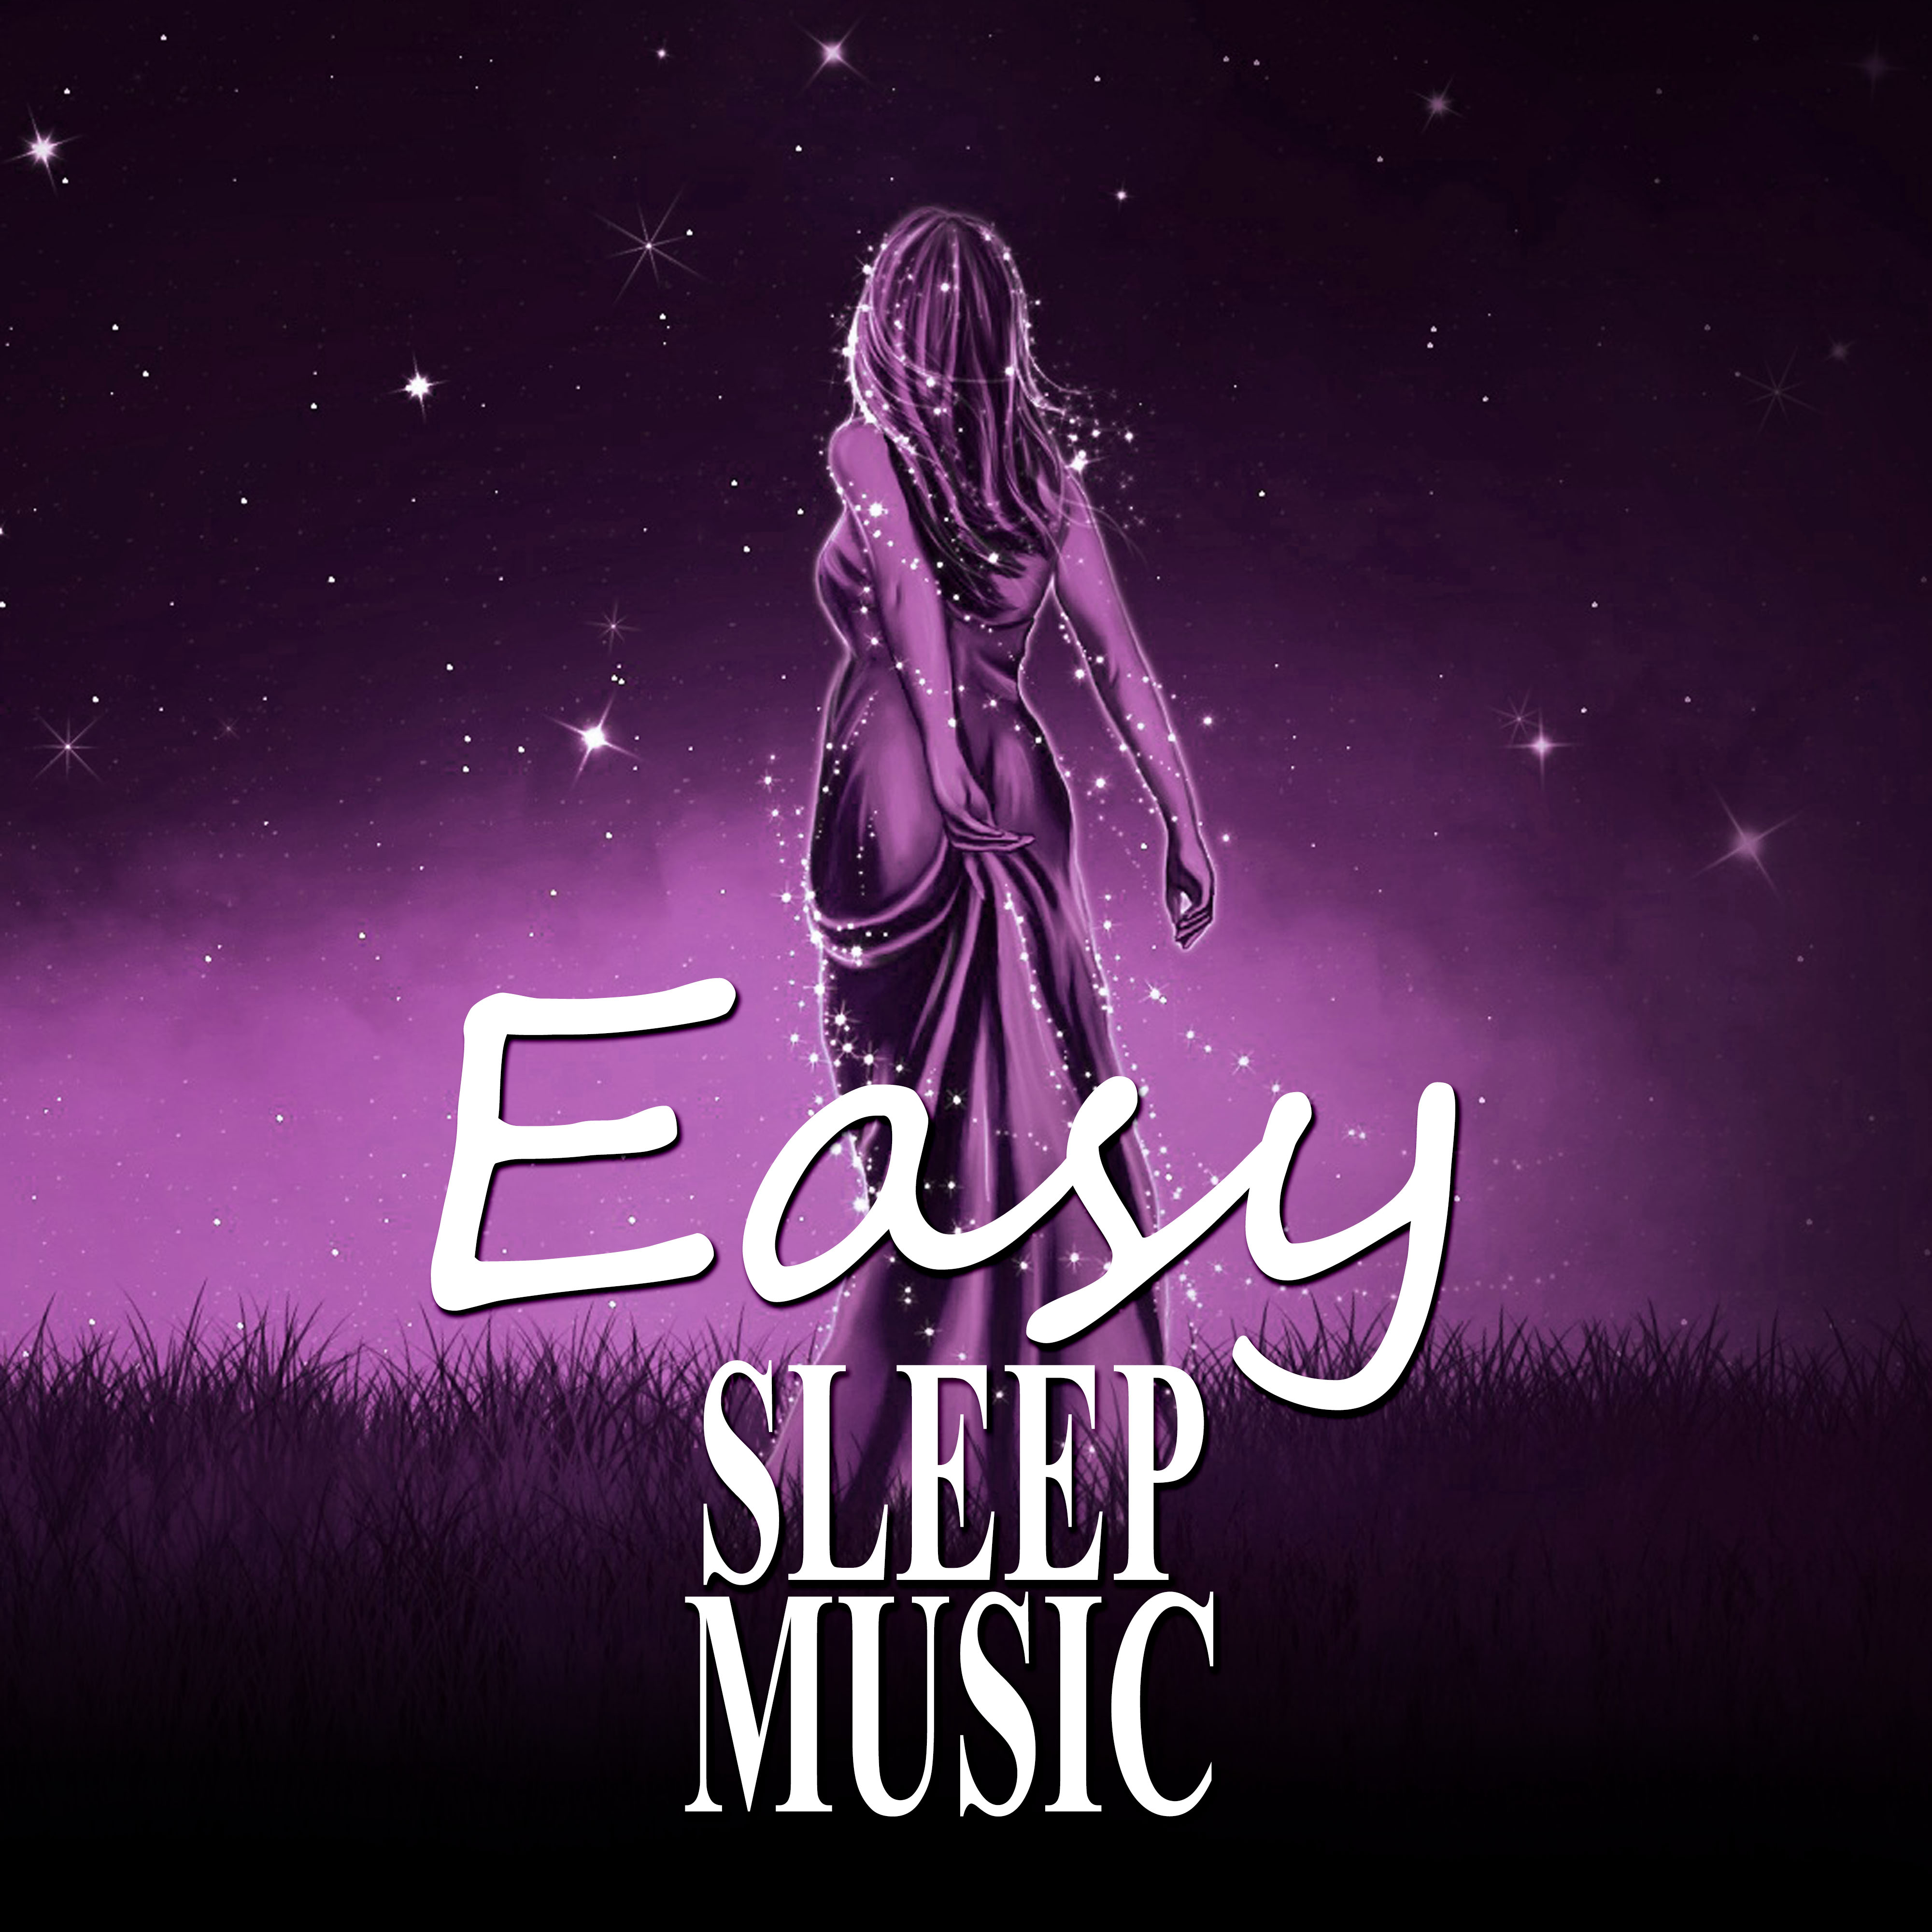 Easy Sleep Music - Sounds of Nature, Peaceful Music, White Noise, New Age, Music for Sleep, Soothing Sleep